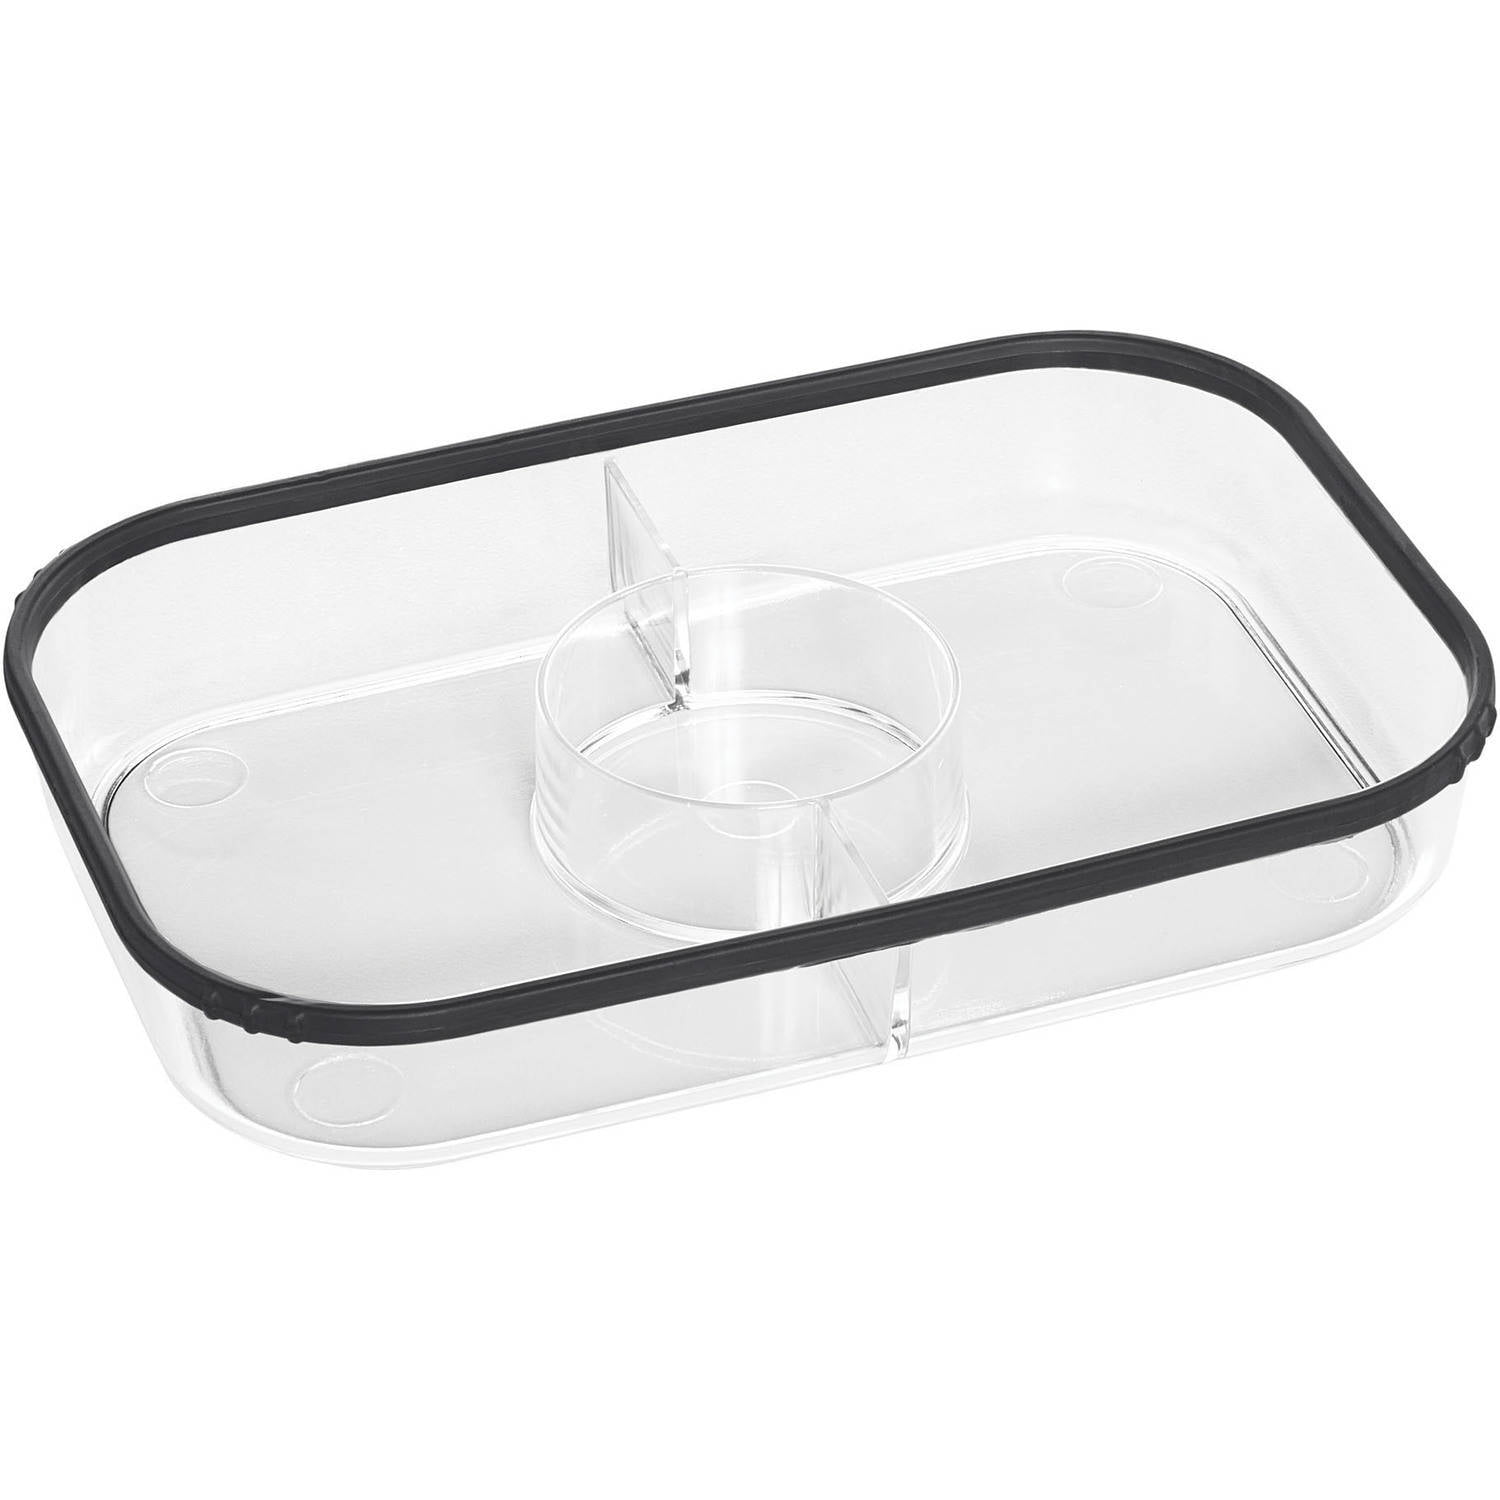 Rubbermaid® Brilliance Small Food Containers - Clear, 2 pk